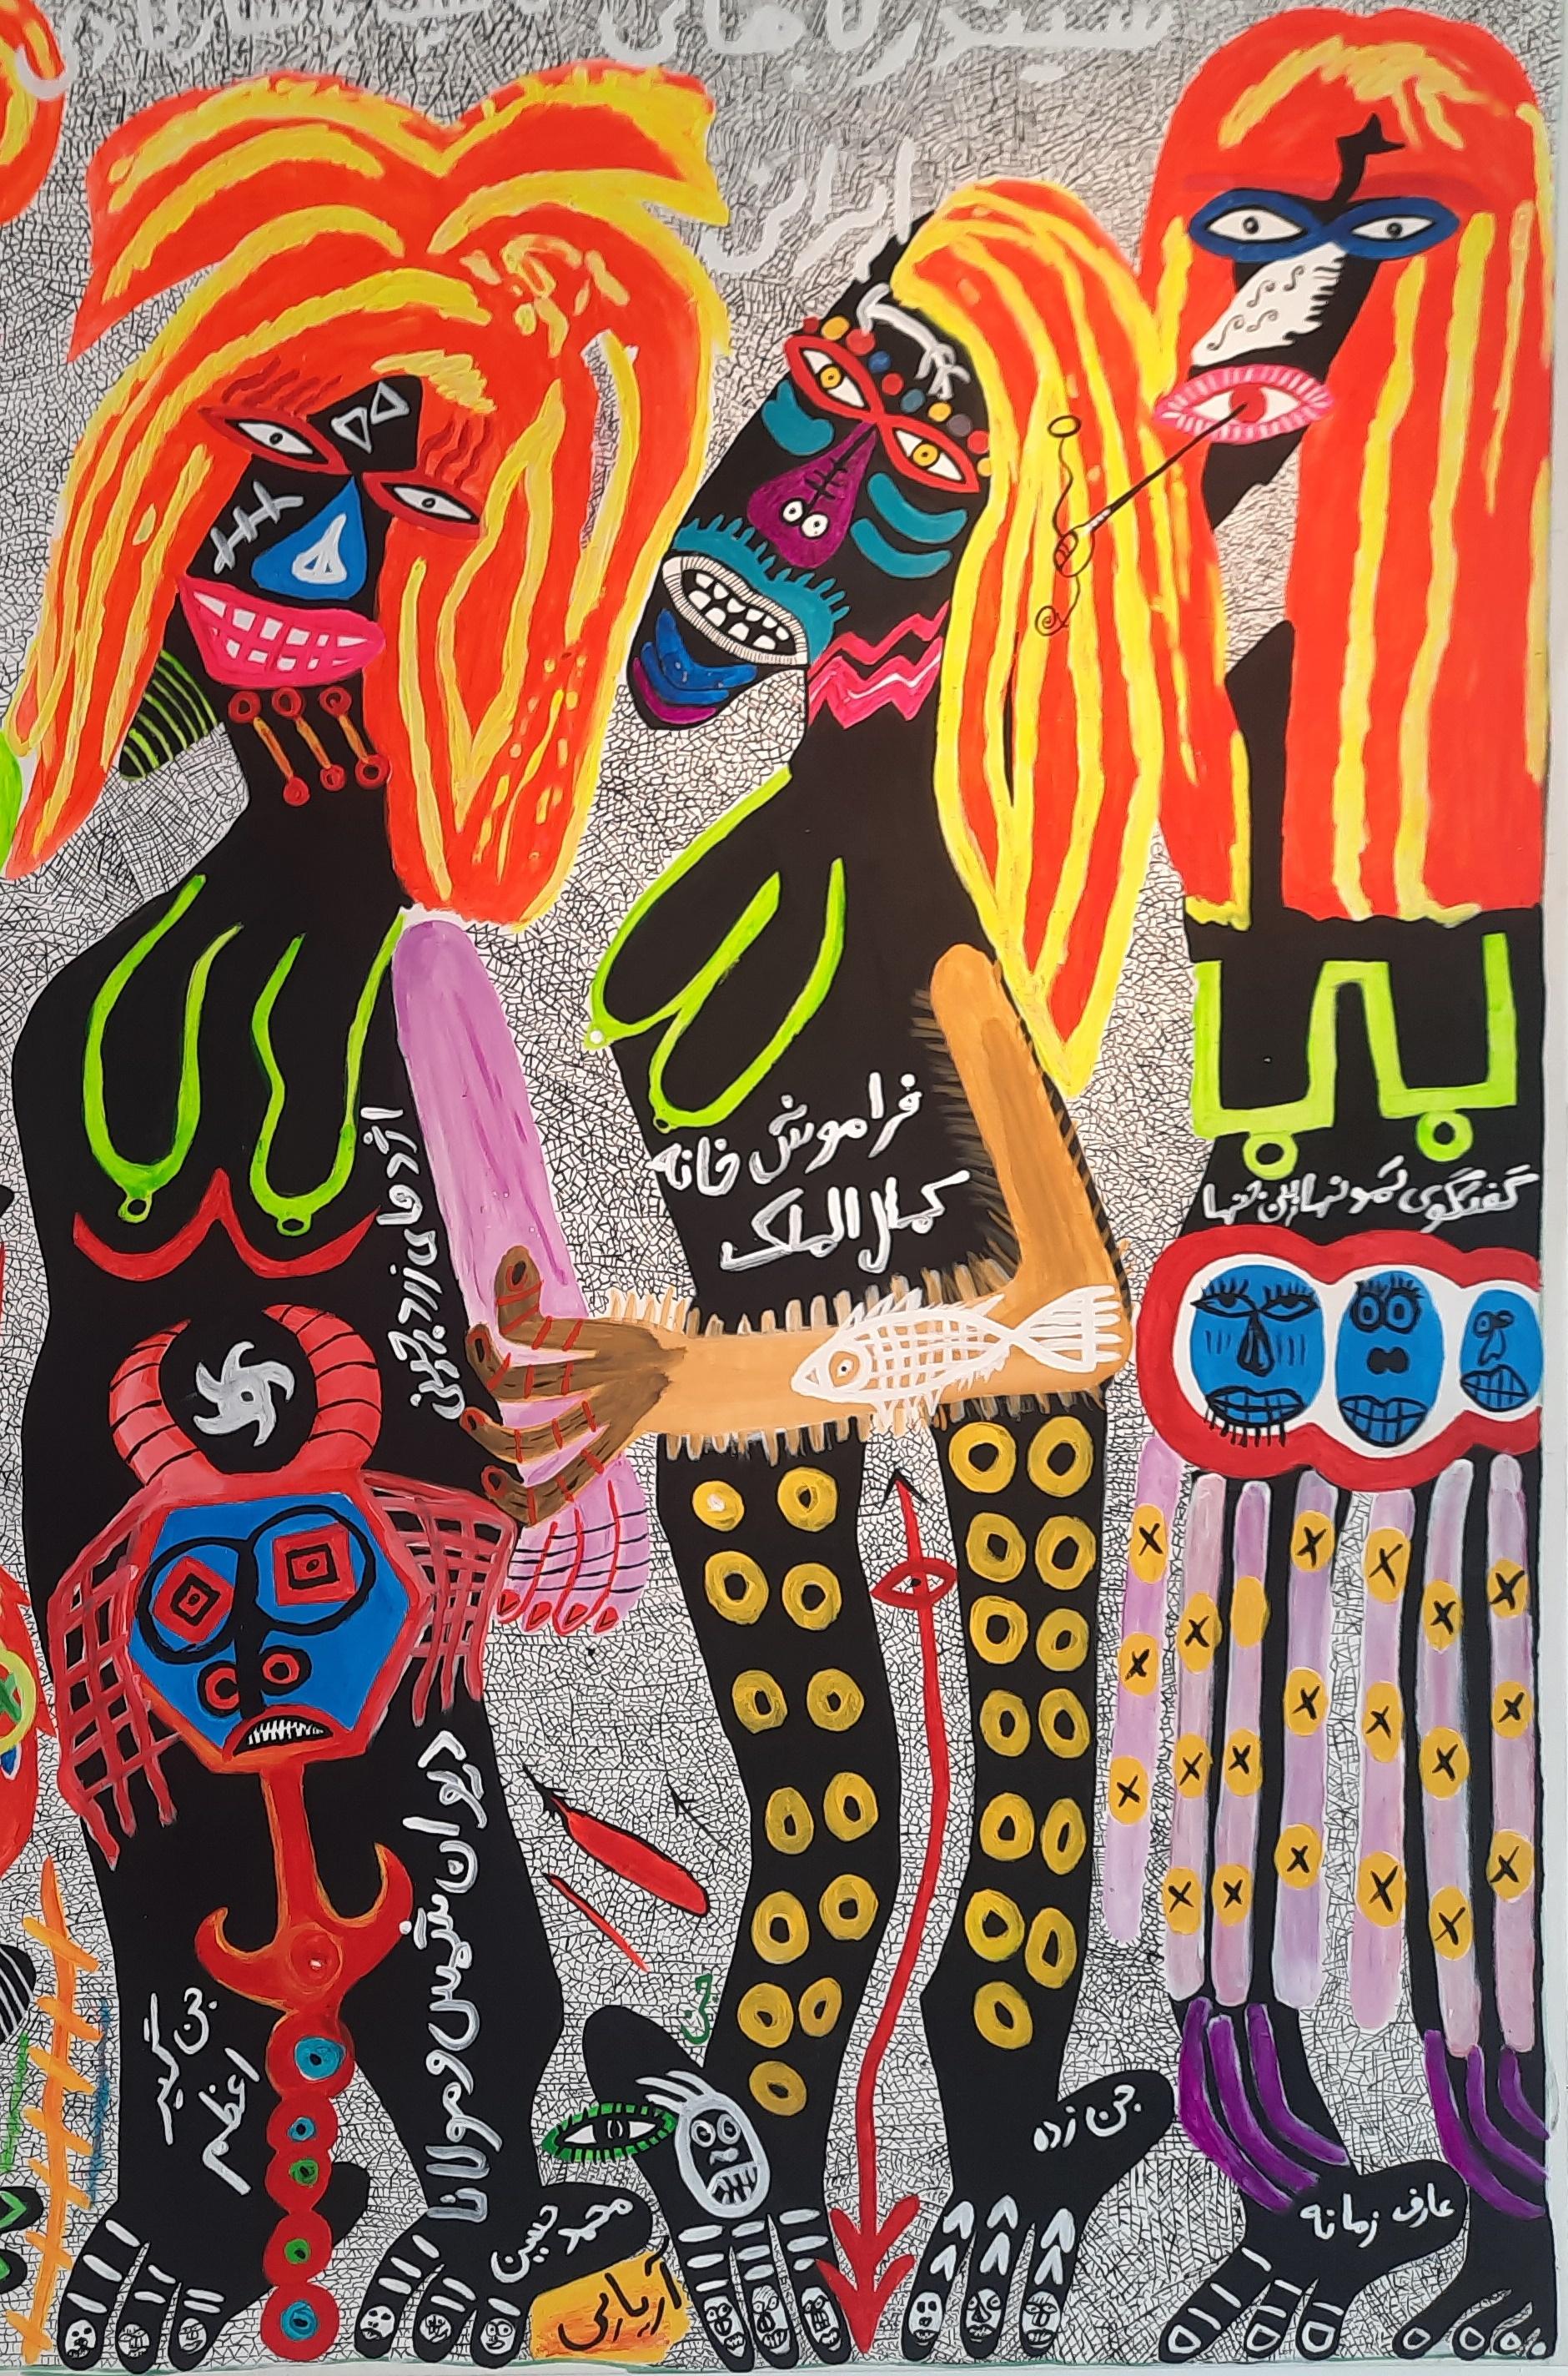 Acrylic paint on canvas
Hand-signed low in the center

« Here the barbaric or savage ceremonies of New Guinea take on the air of Rio carnival.
Here the vitality bursts and the colors dance the jig while thundering.
A charivari of African masks,